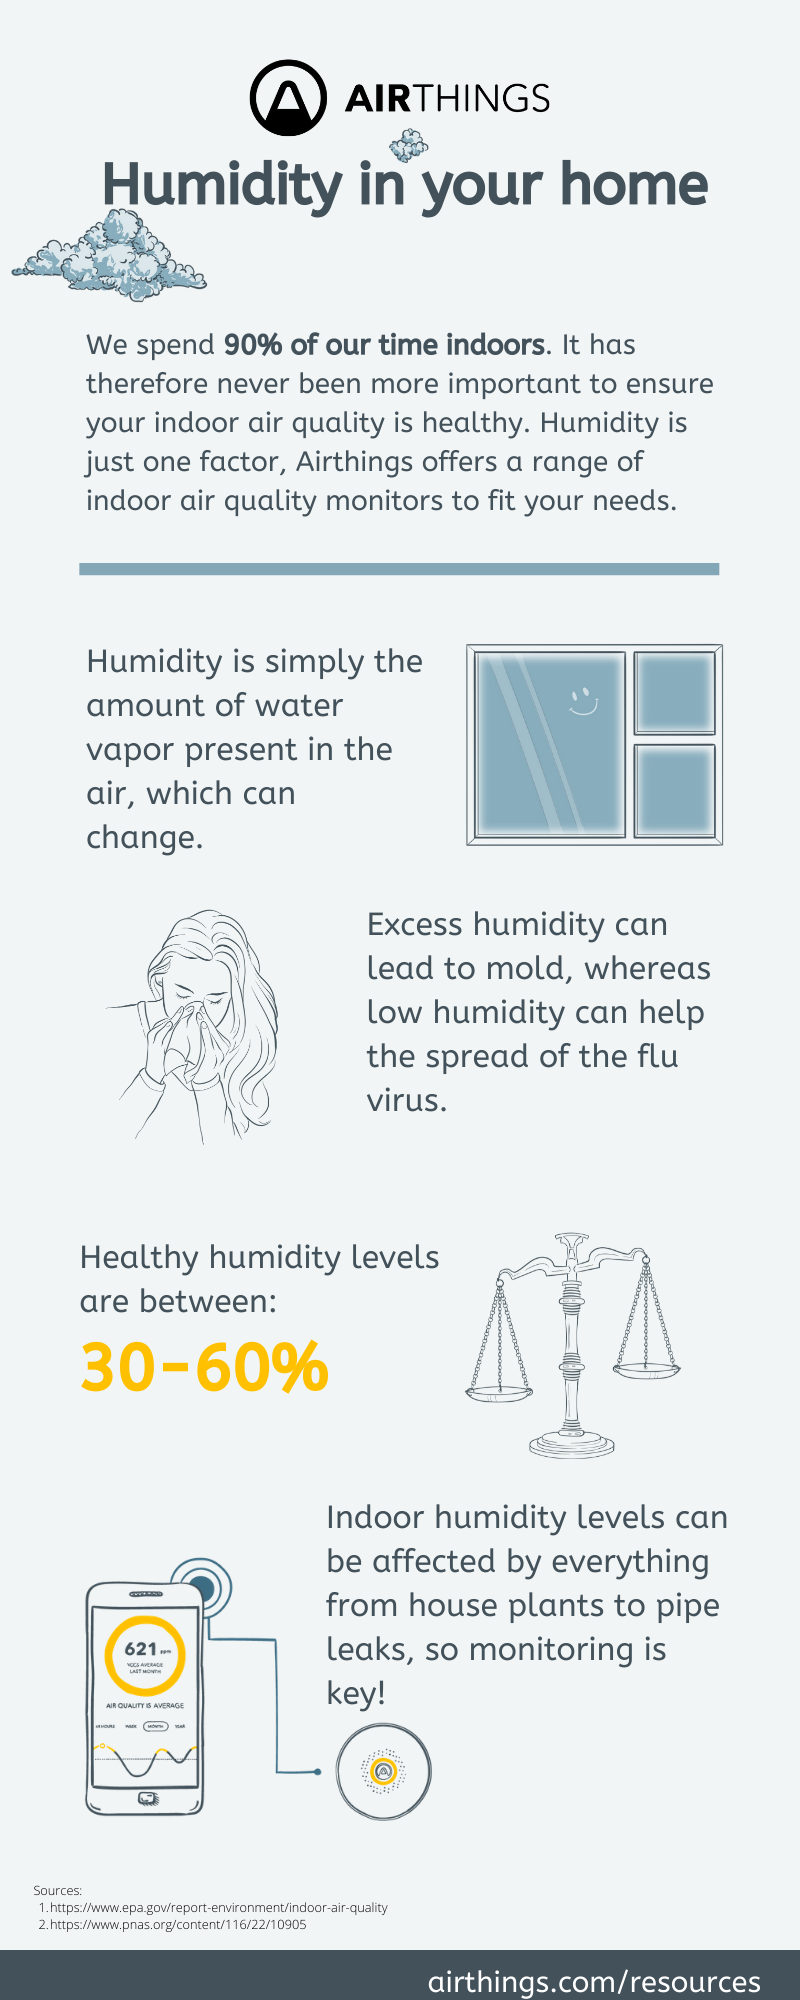 Airthings humidity infographic